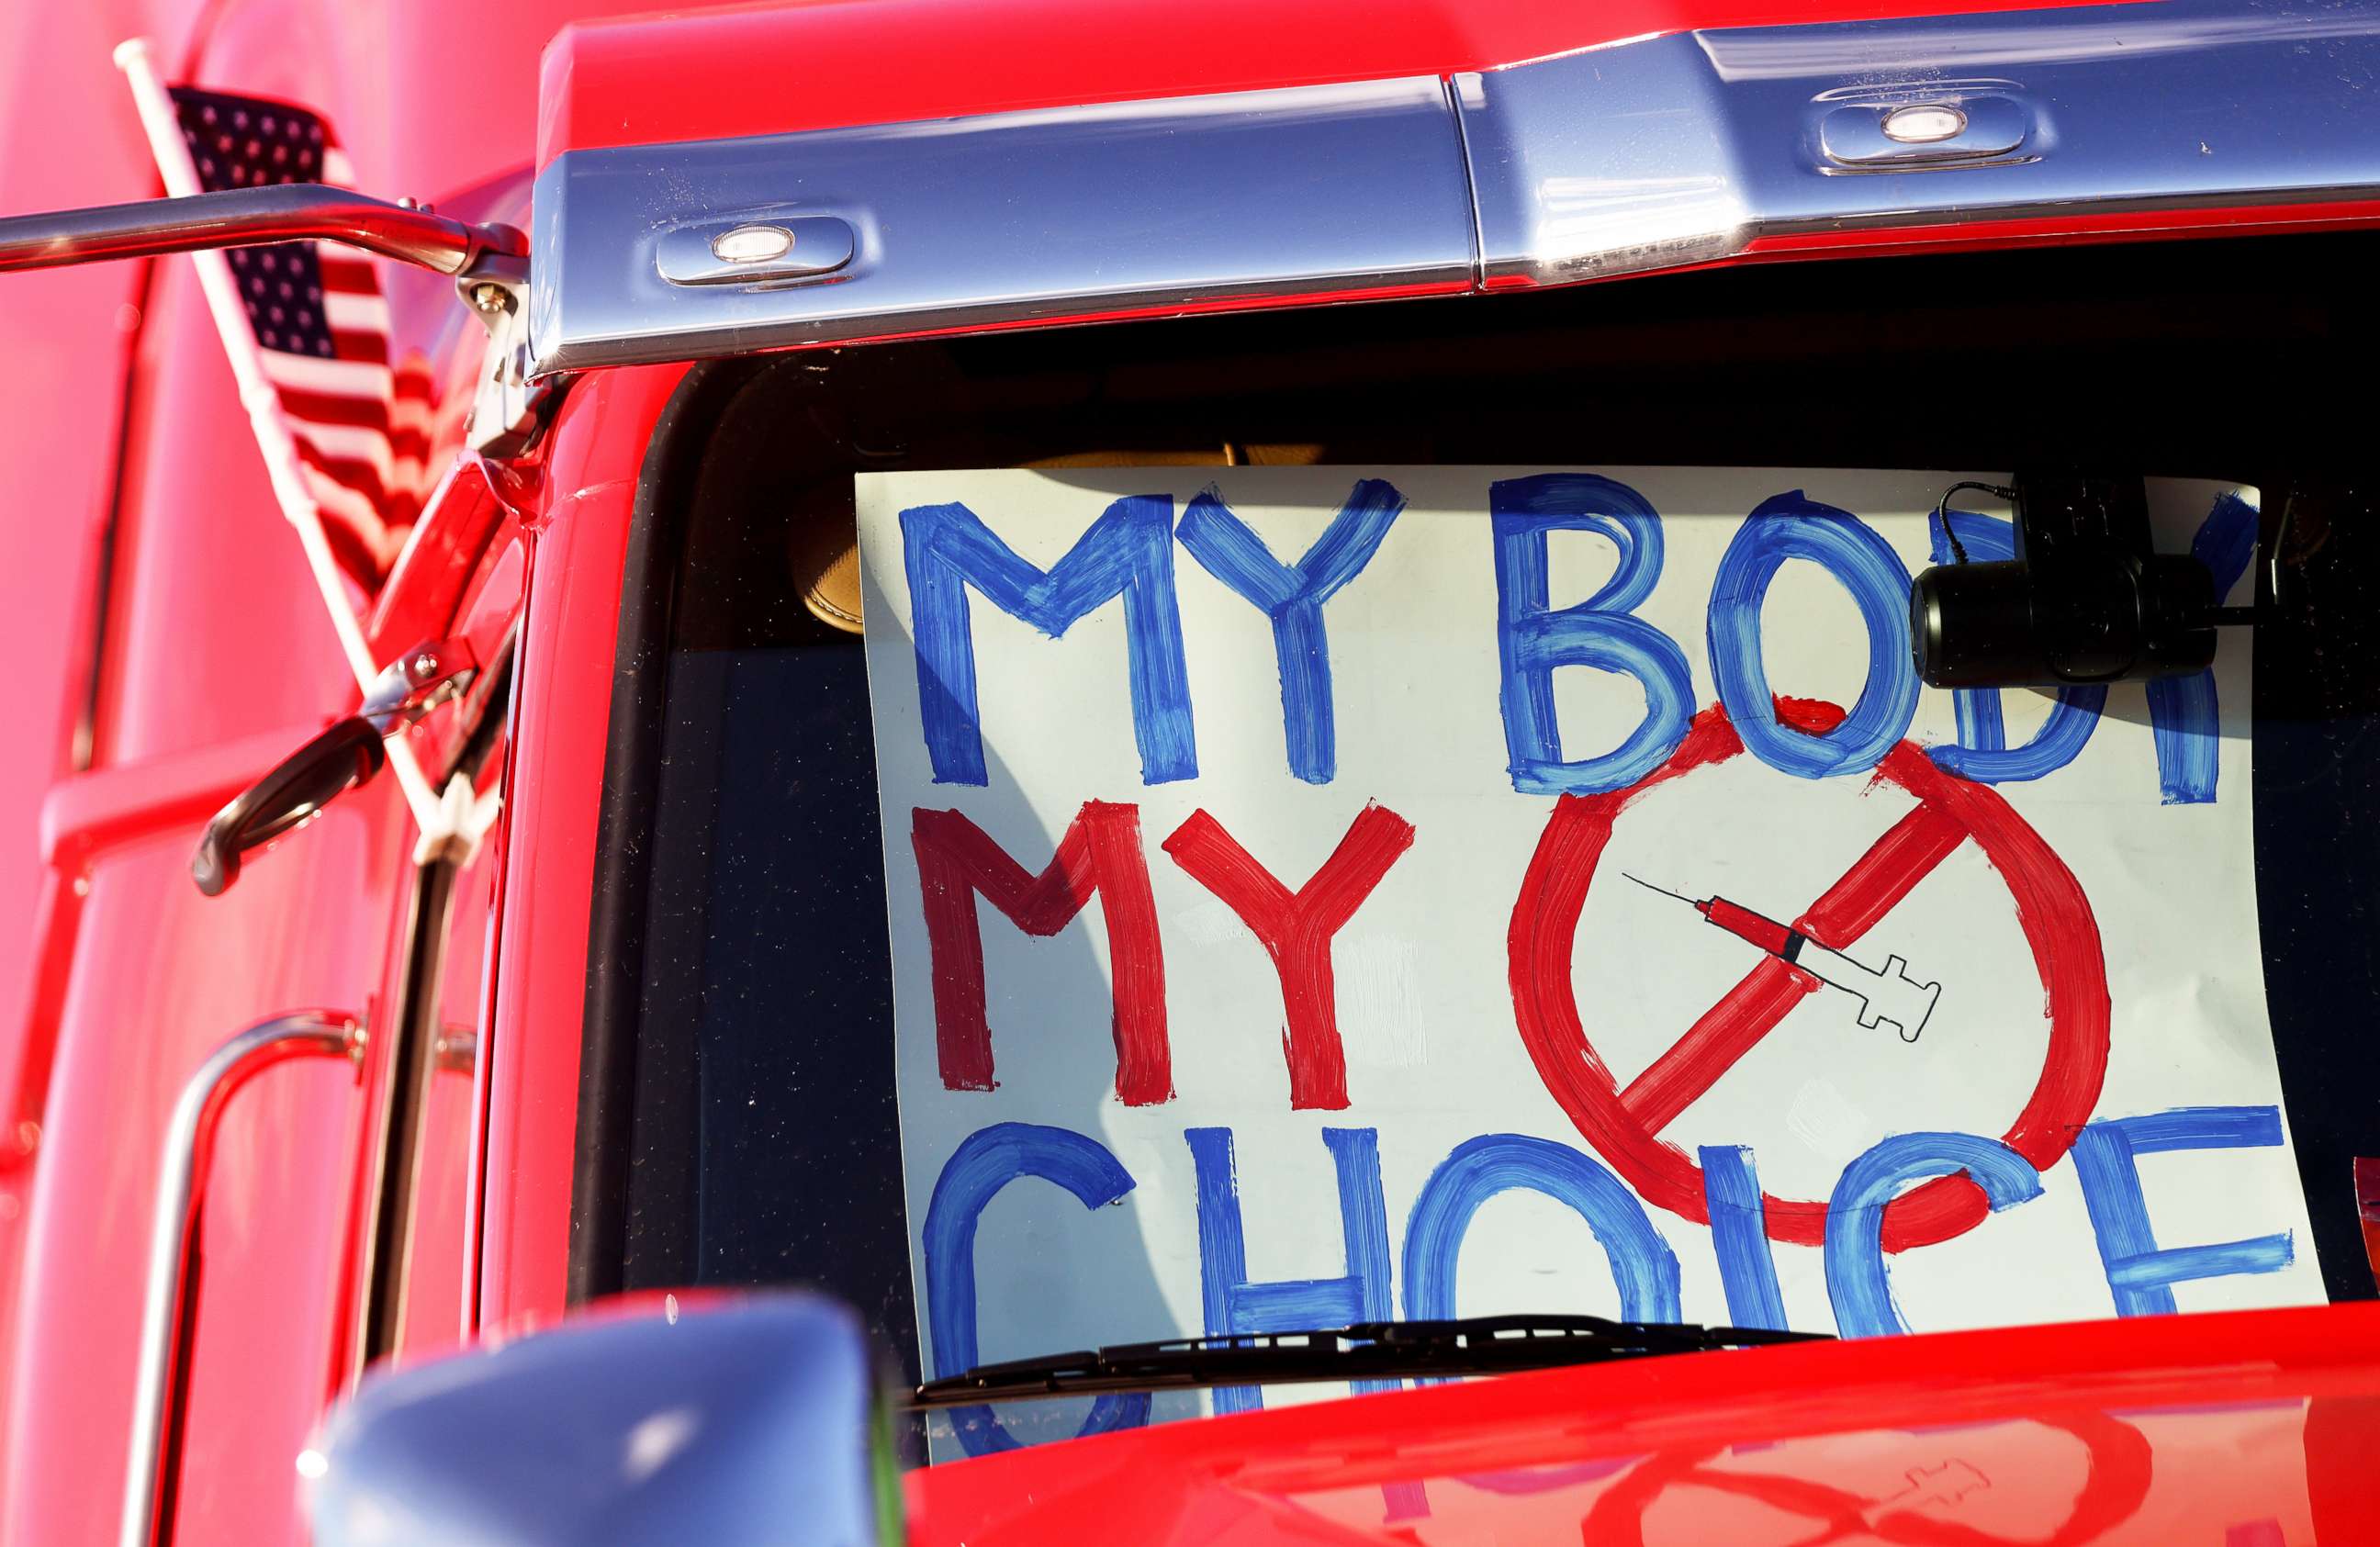 PHOTO: A "My Body My Choice" sign is displayed in a truck in California as truck drivers and supporters gather before a "People's Convoy" departs for Washington, DC to protest COVID-19 mandates on Feb. 22, 2022.